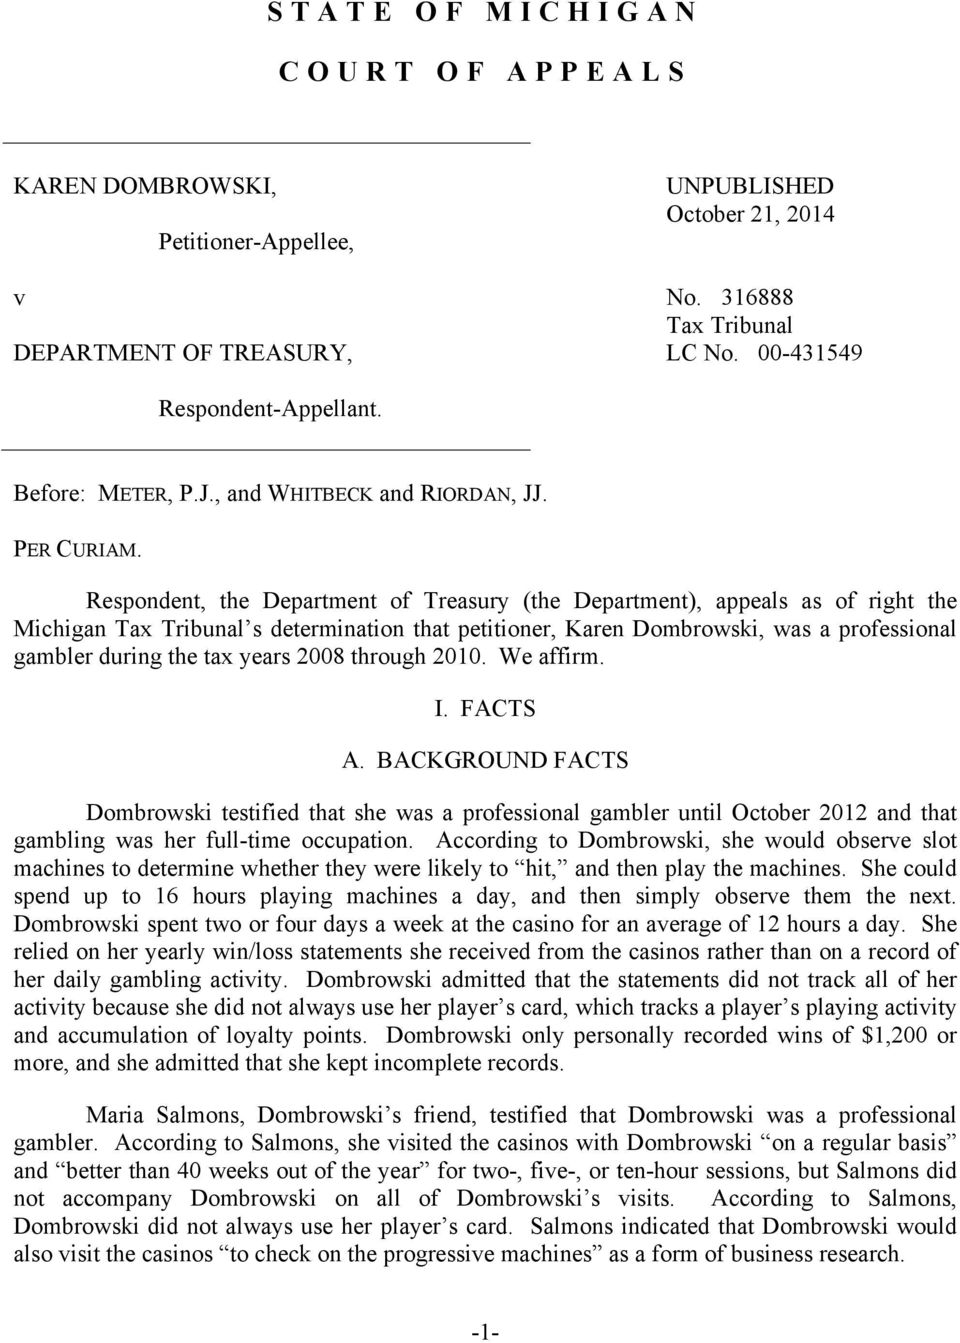 Respondent, the Department of Treasury (the Department), appeals as of right the Michigan Tax Tribunal s determination that petitioner, Karen Dombrowski, was a professional gambler during the tax